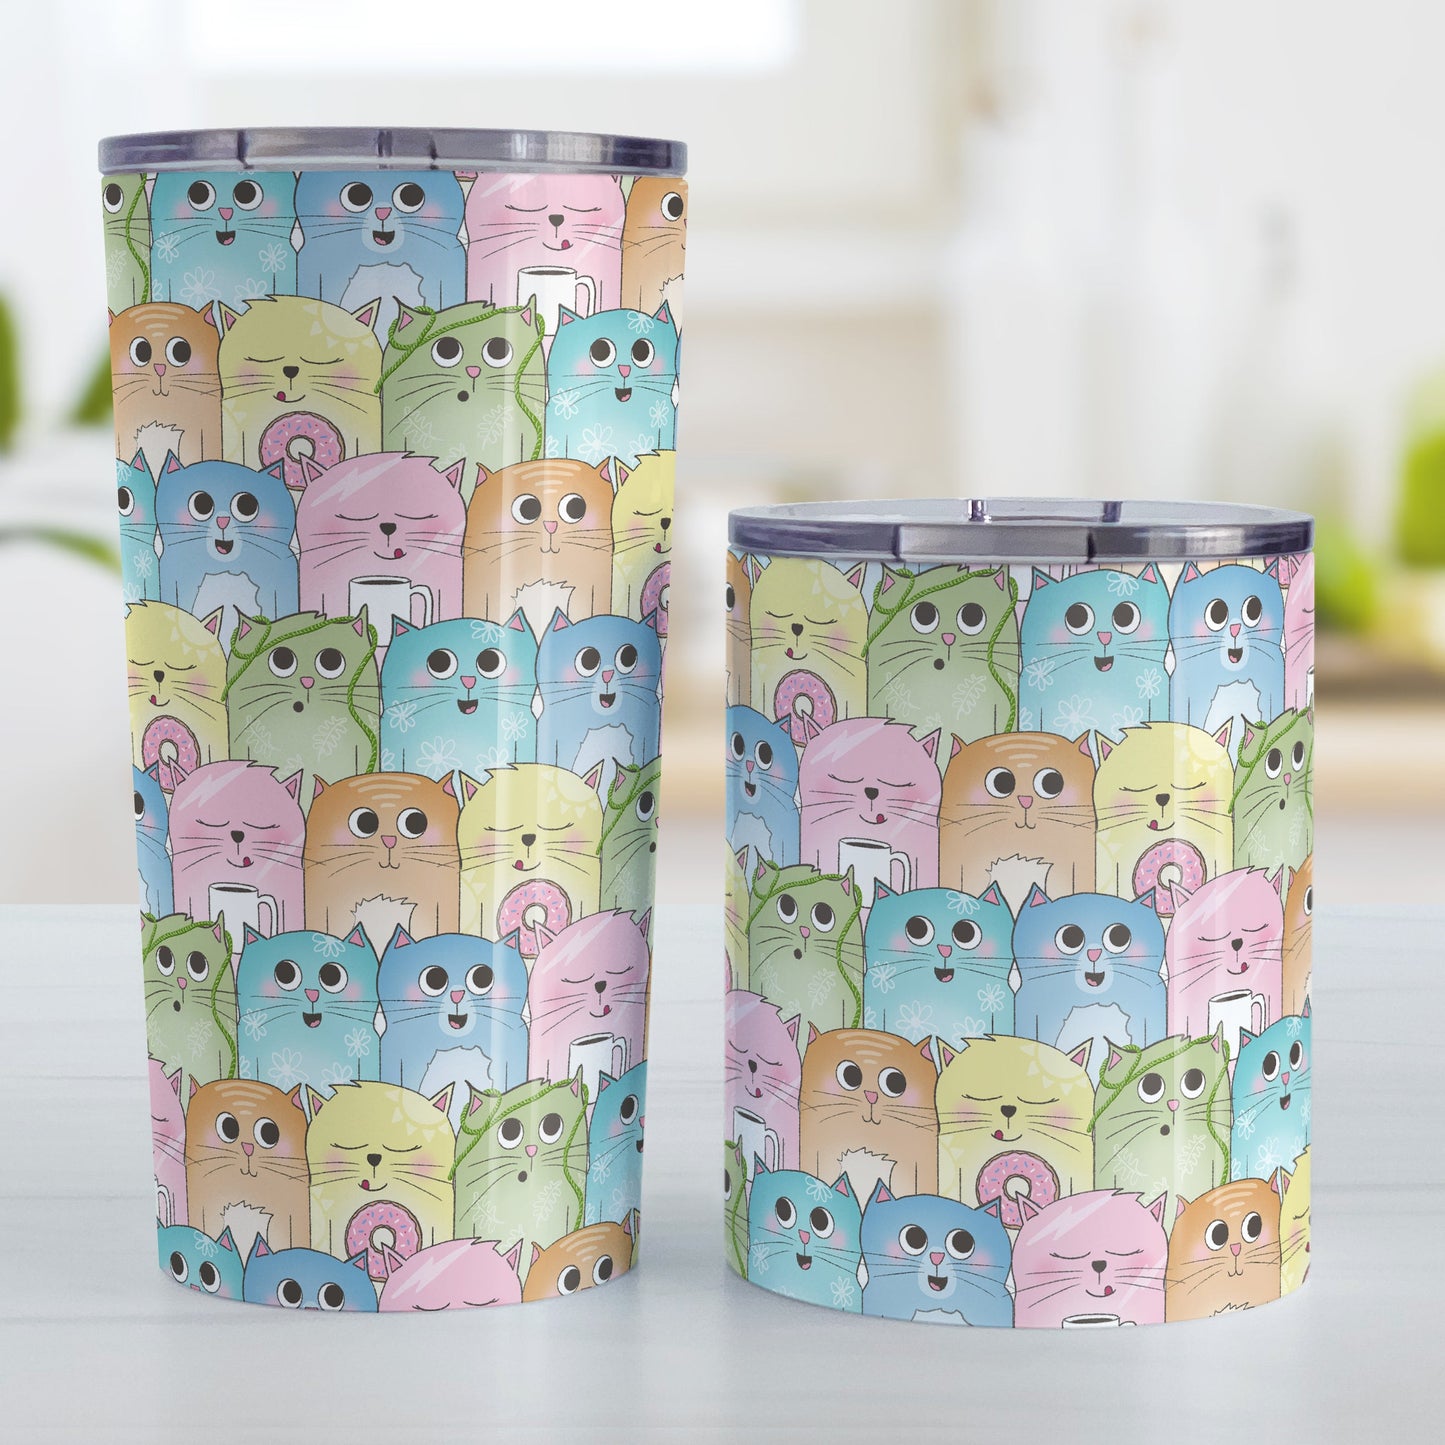 Colorful Cat Stack Pattern Tumbler Cup (20oz and 10oz, stainless steel insulated) at Amy's Coffee Mugs. Cute cats tumbler cup with an illustrated pattern of different colorful cats (in pink, orange, yellow, green, turquoise, and blue) with different fun expressions, with yarn, coffee, and donuts. This stacked pattern of cats wraps around the cup. Picture shows both cup sizes next to each other.